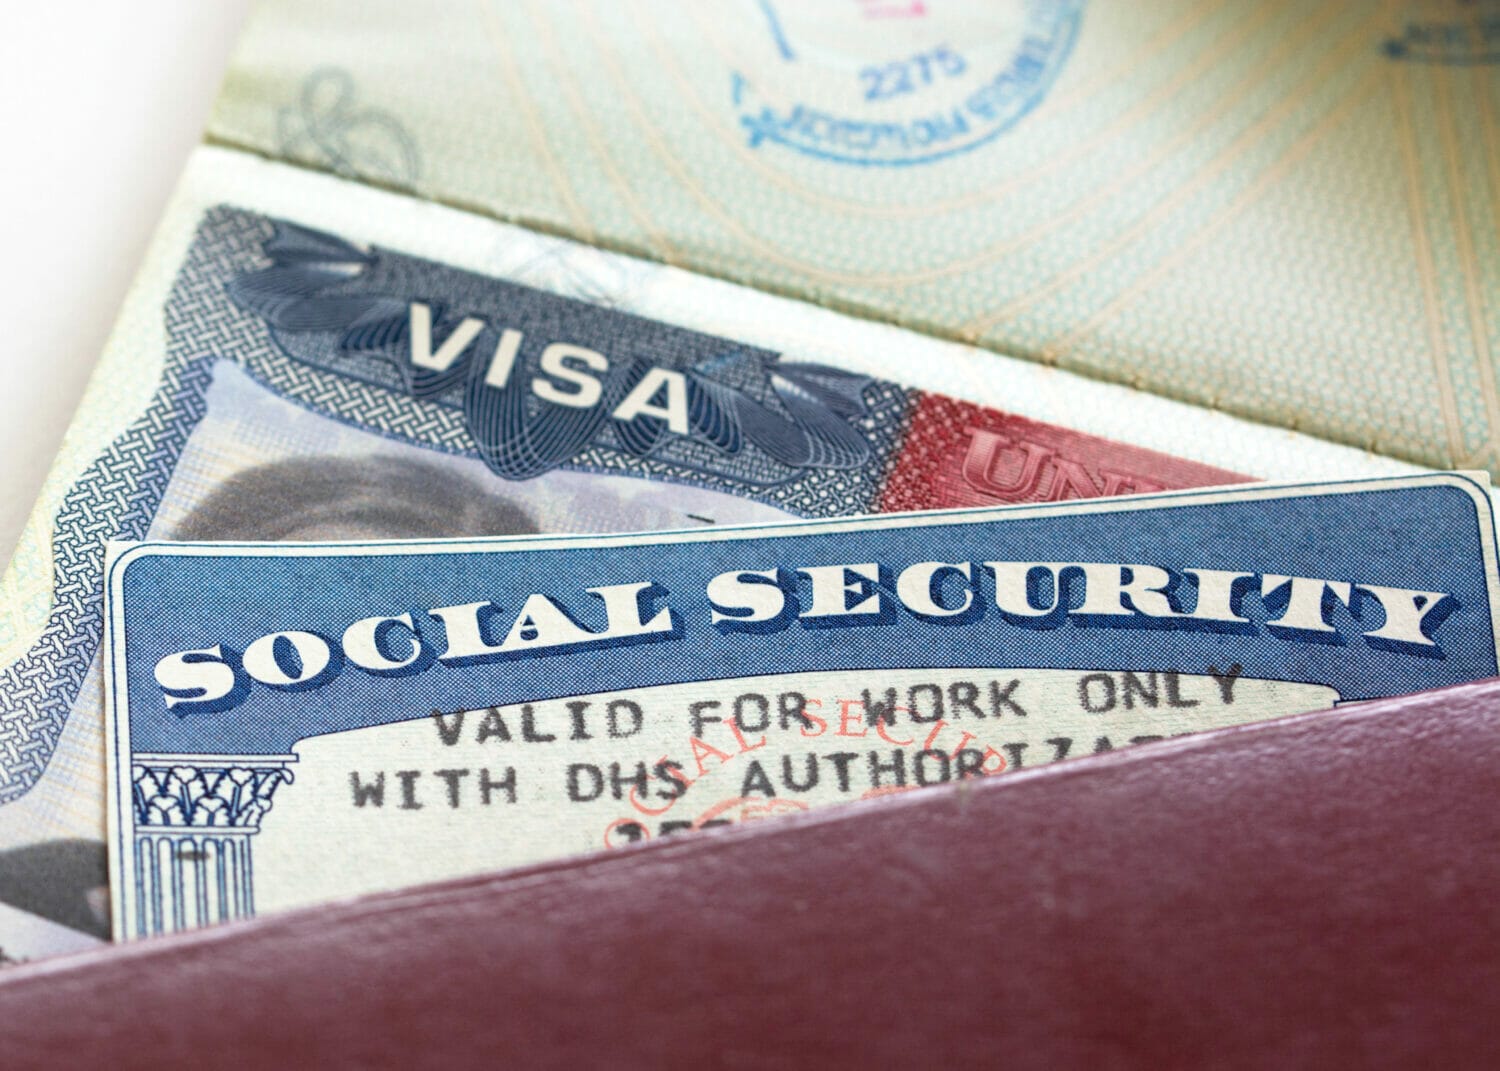 The H-1 B visa for highly skilled workers.